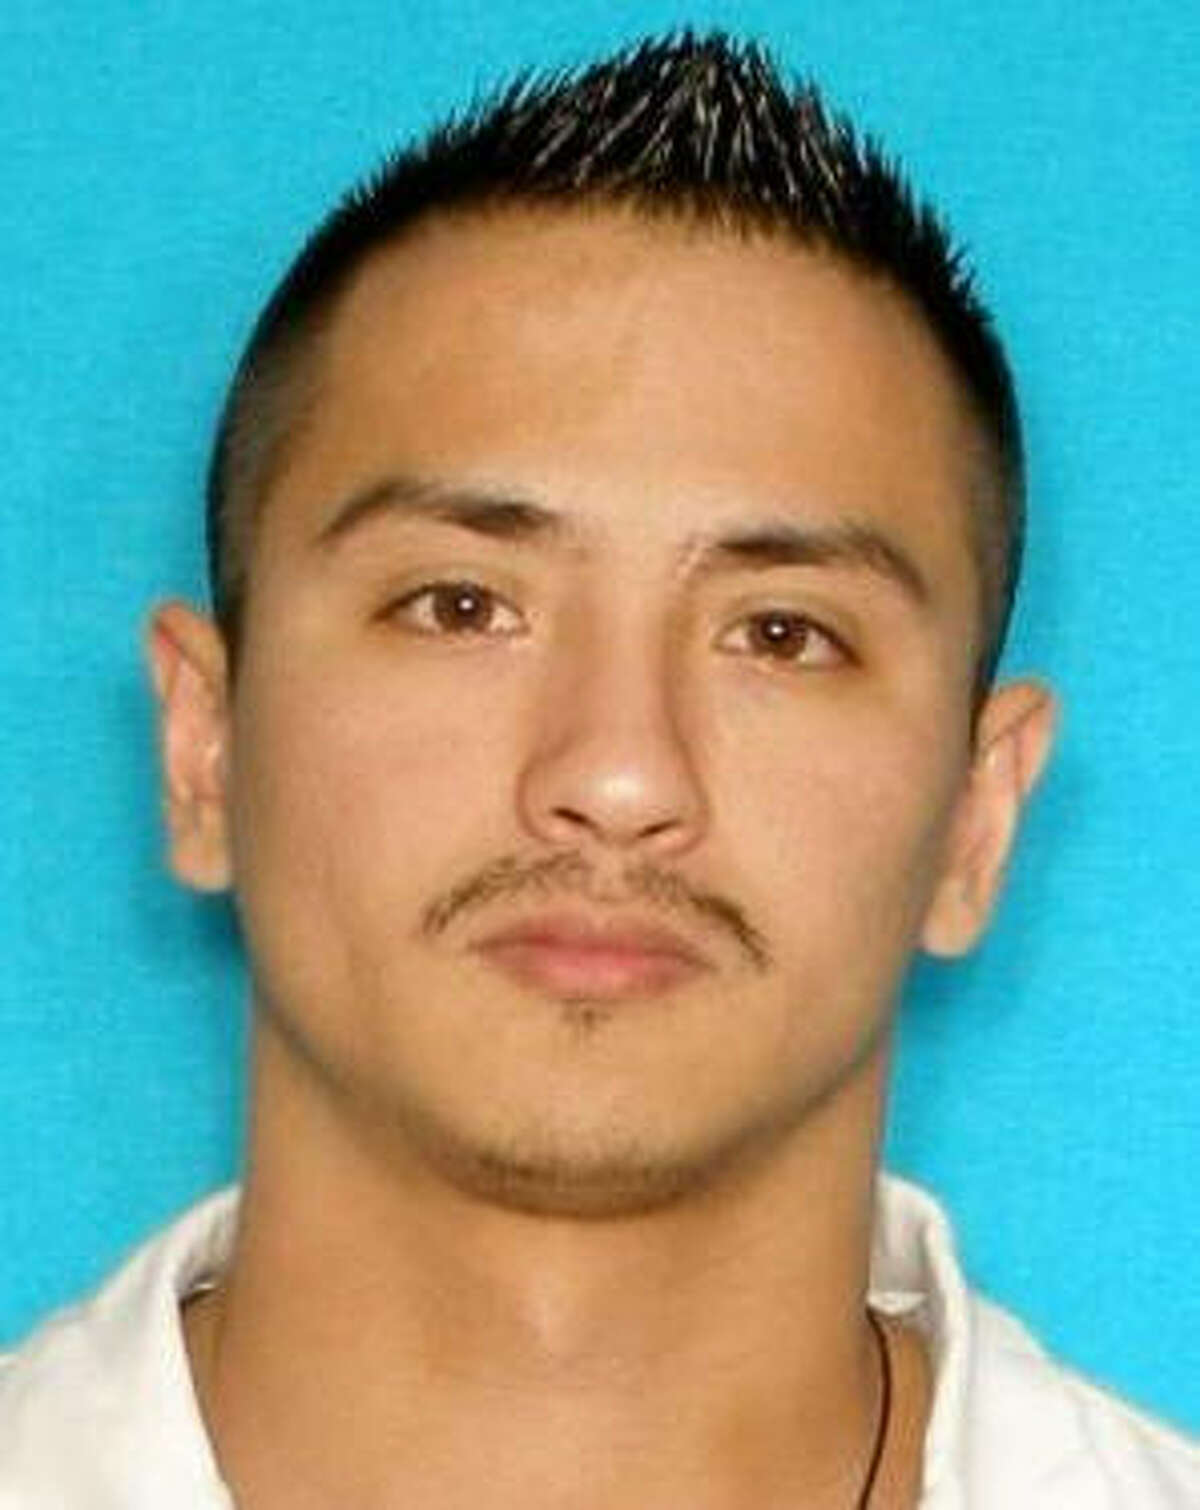 Texas Most Wanted Sex Offenders List Has New Member